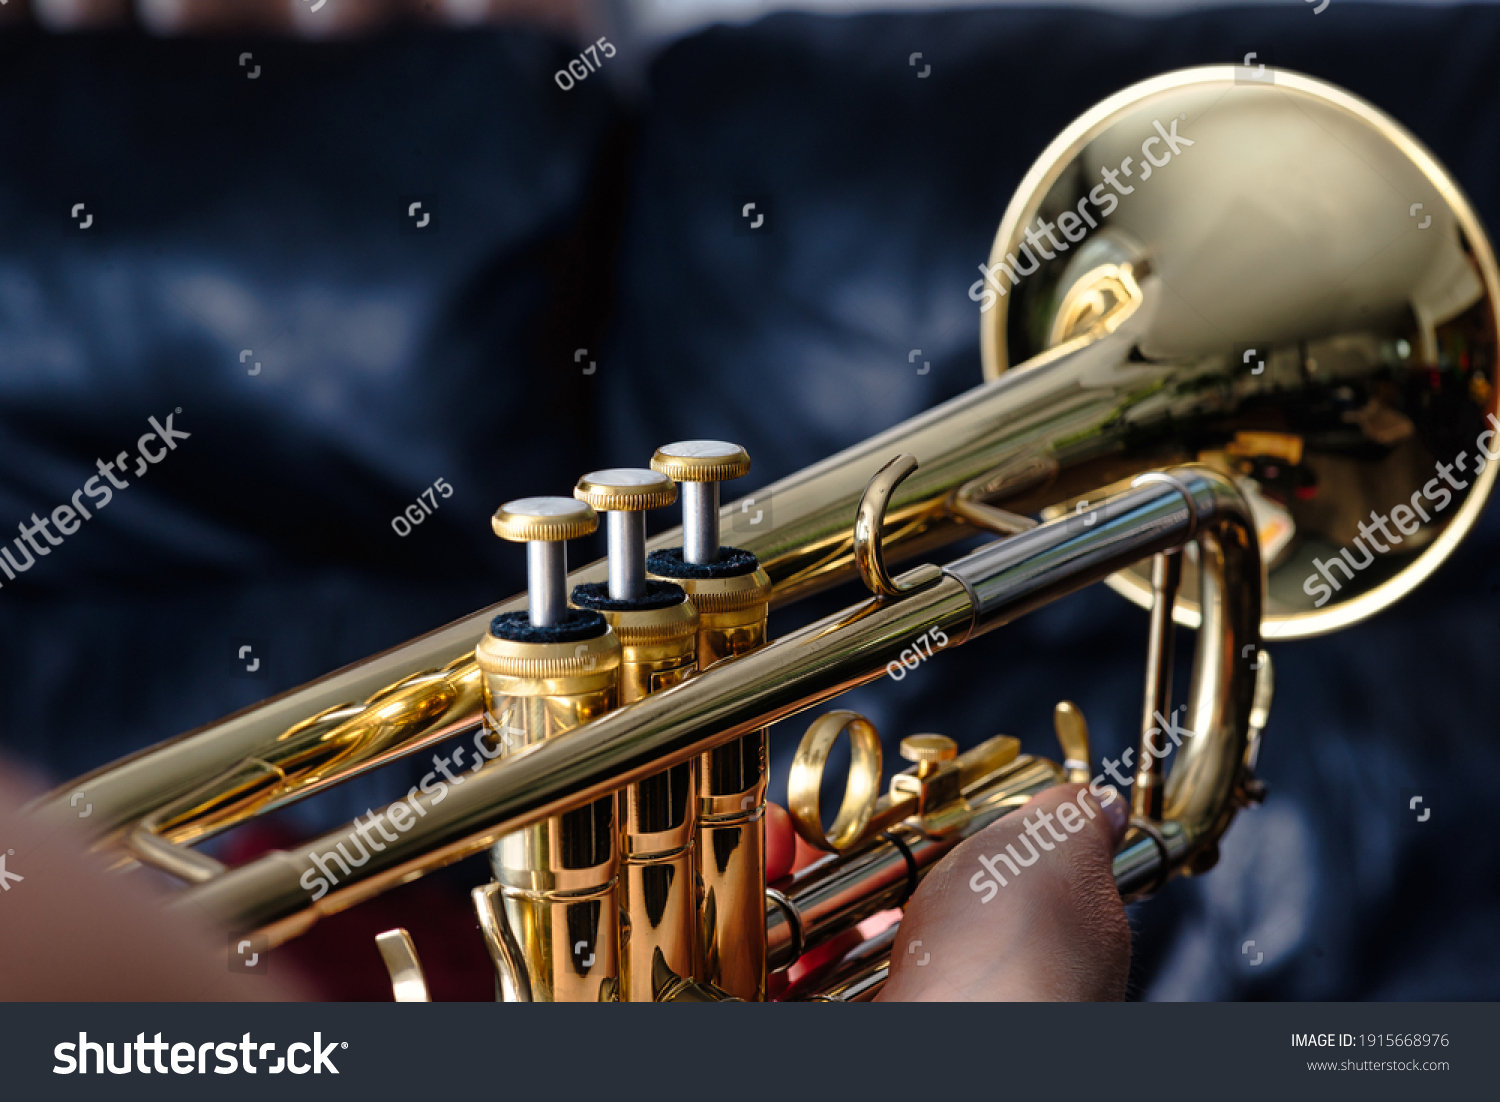 Trumpet. Close up of a trumpet, blurred background   #1915668976